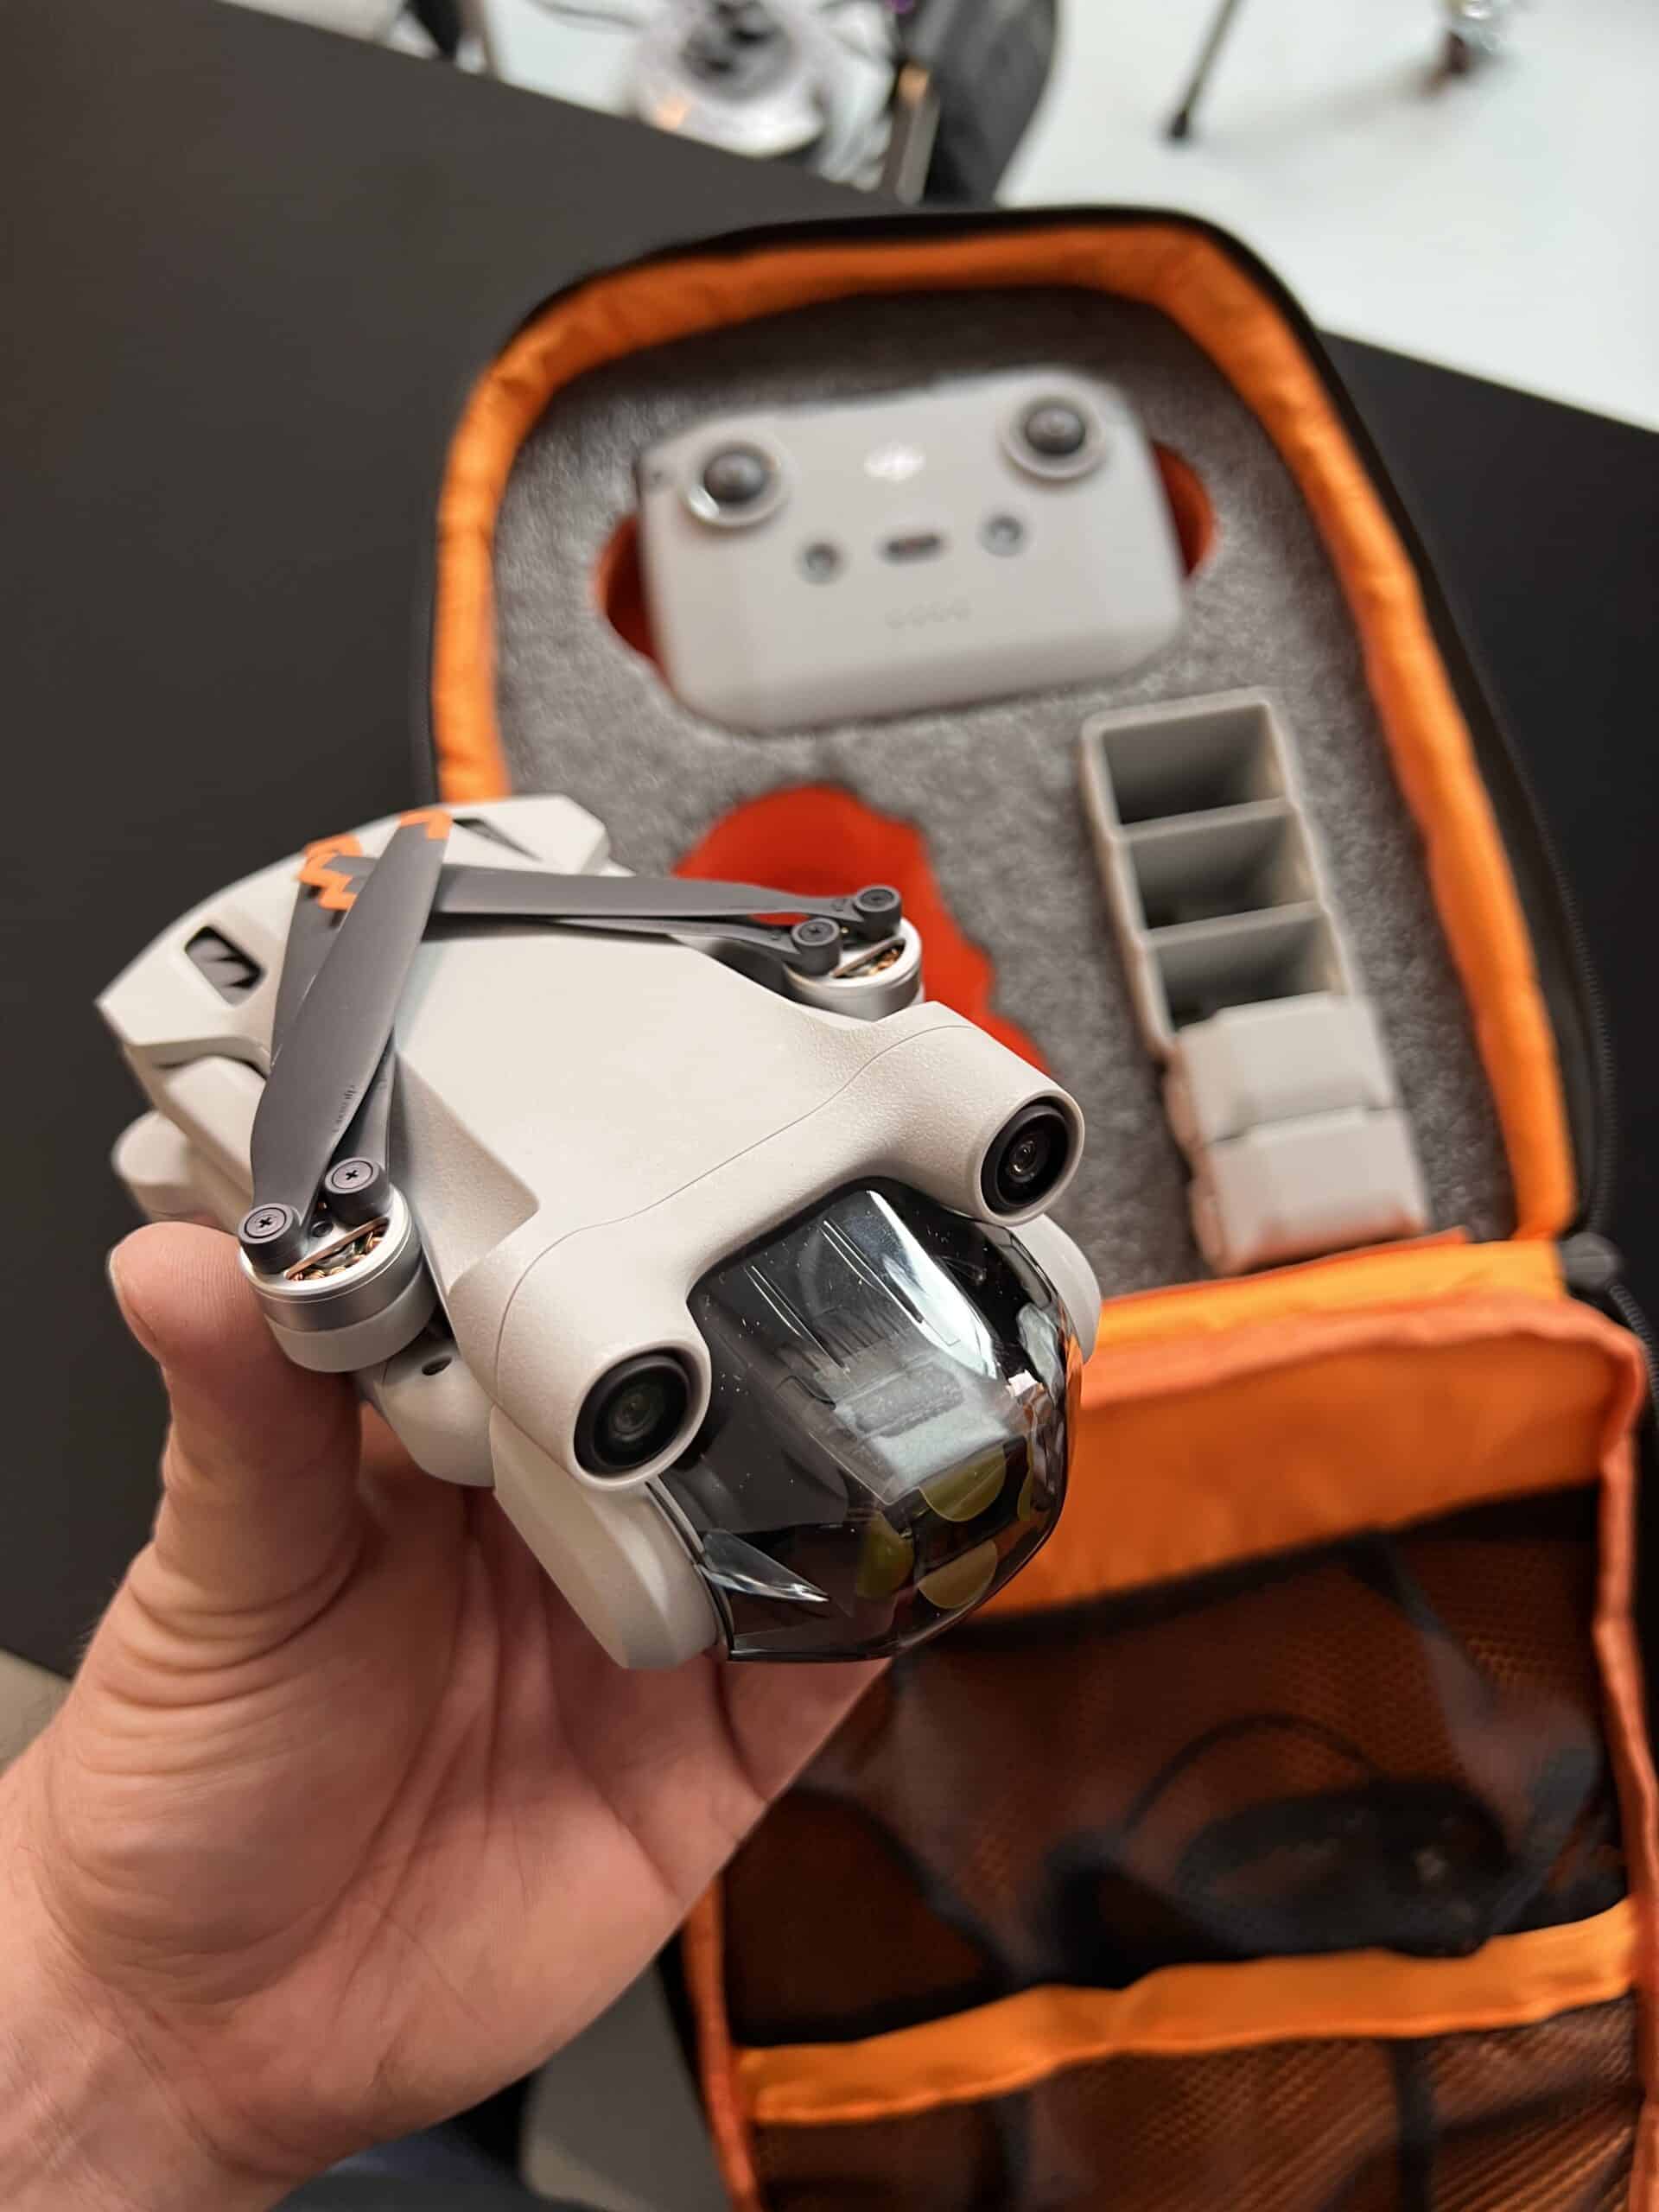 Eyecatching and practical drone storage for this DJI Mini Pro 3 Drone and accessories